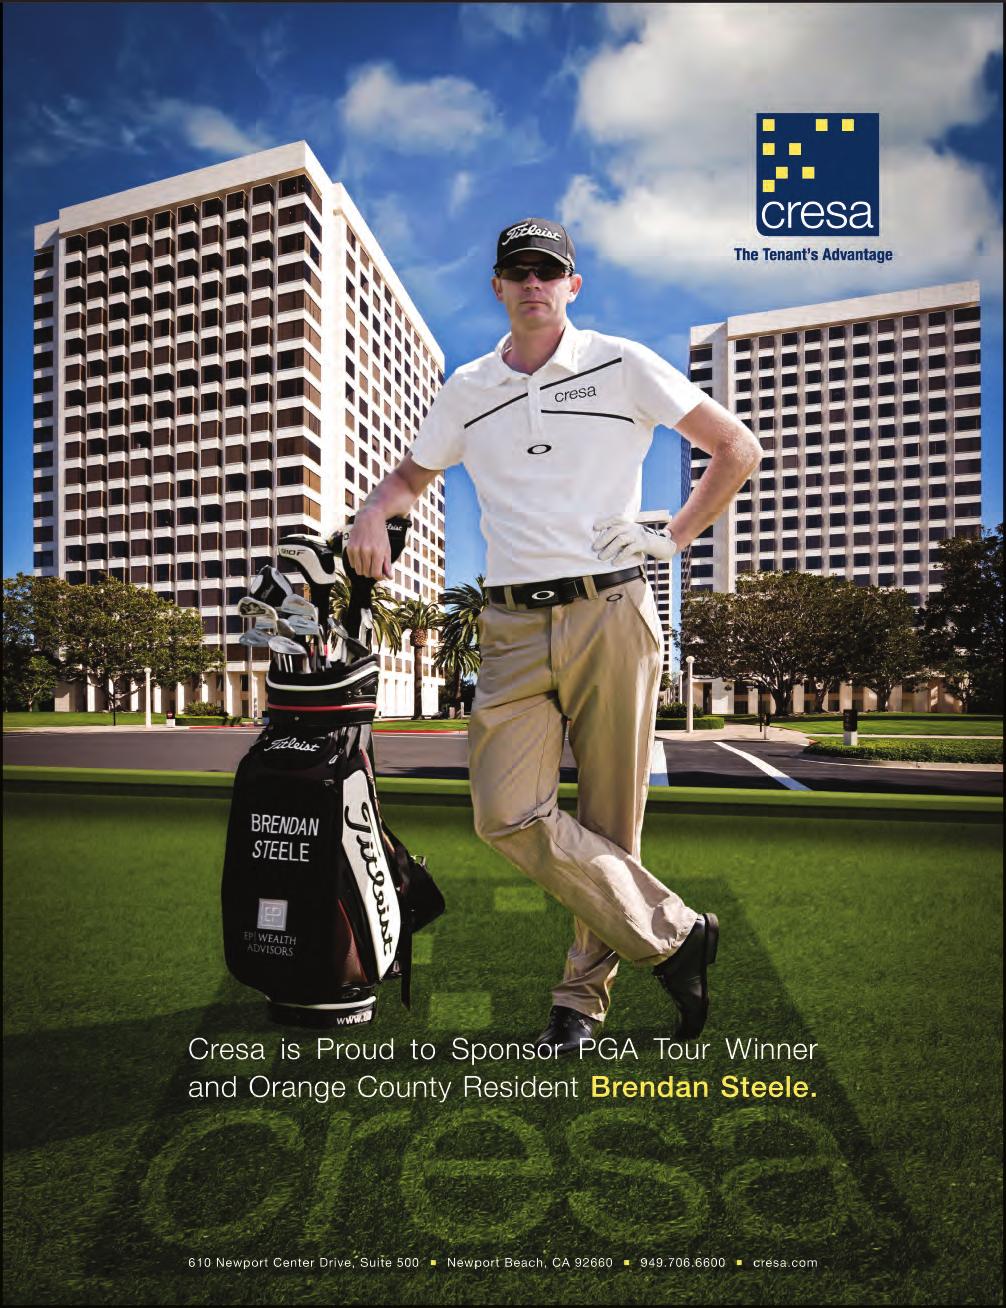 MARCH 4, 2013 TOSHIBA CLASSIC Advertising